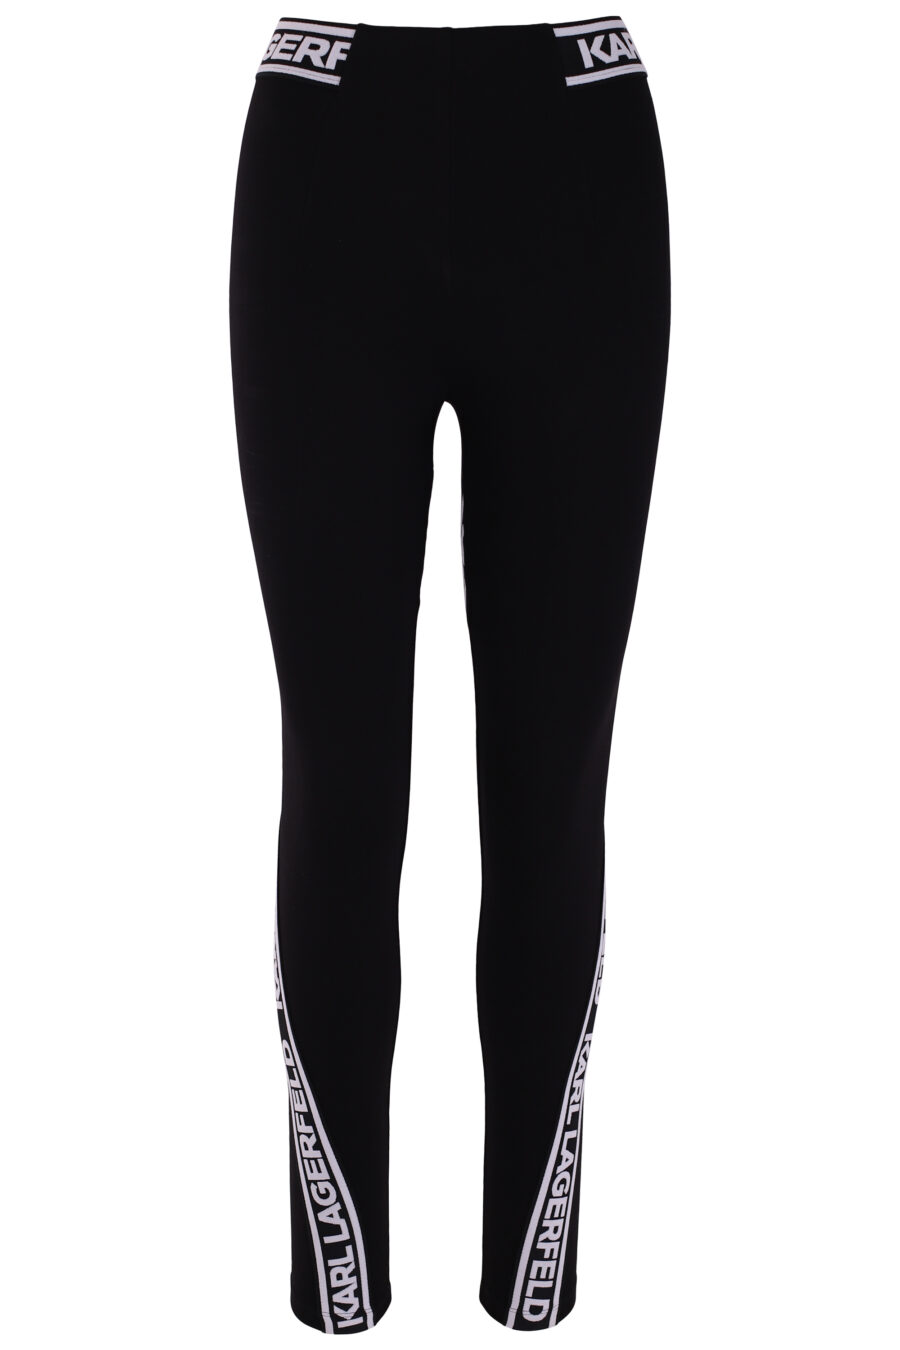 Black leggings with logo tape on the sides - IMG 3716